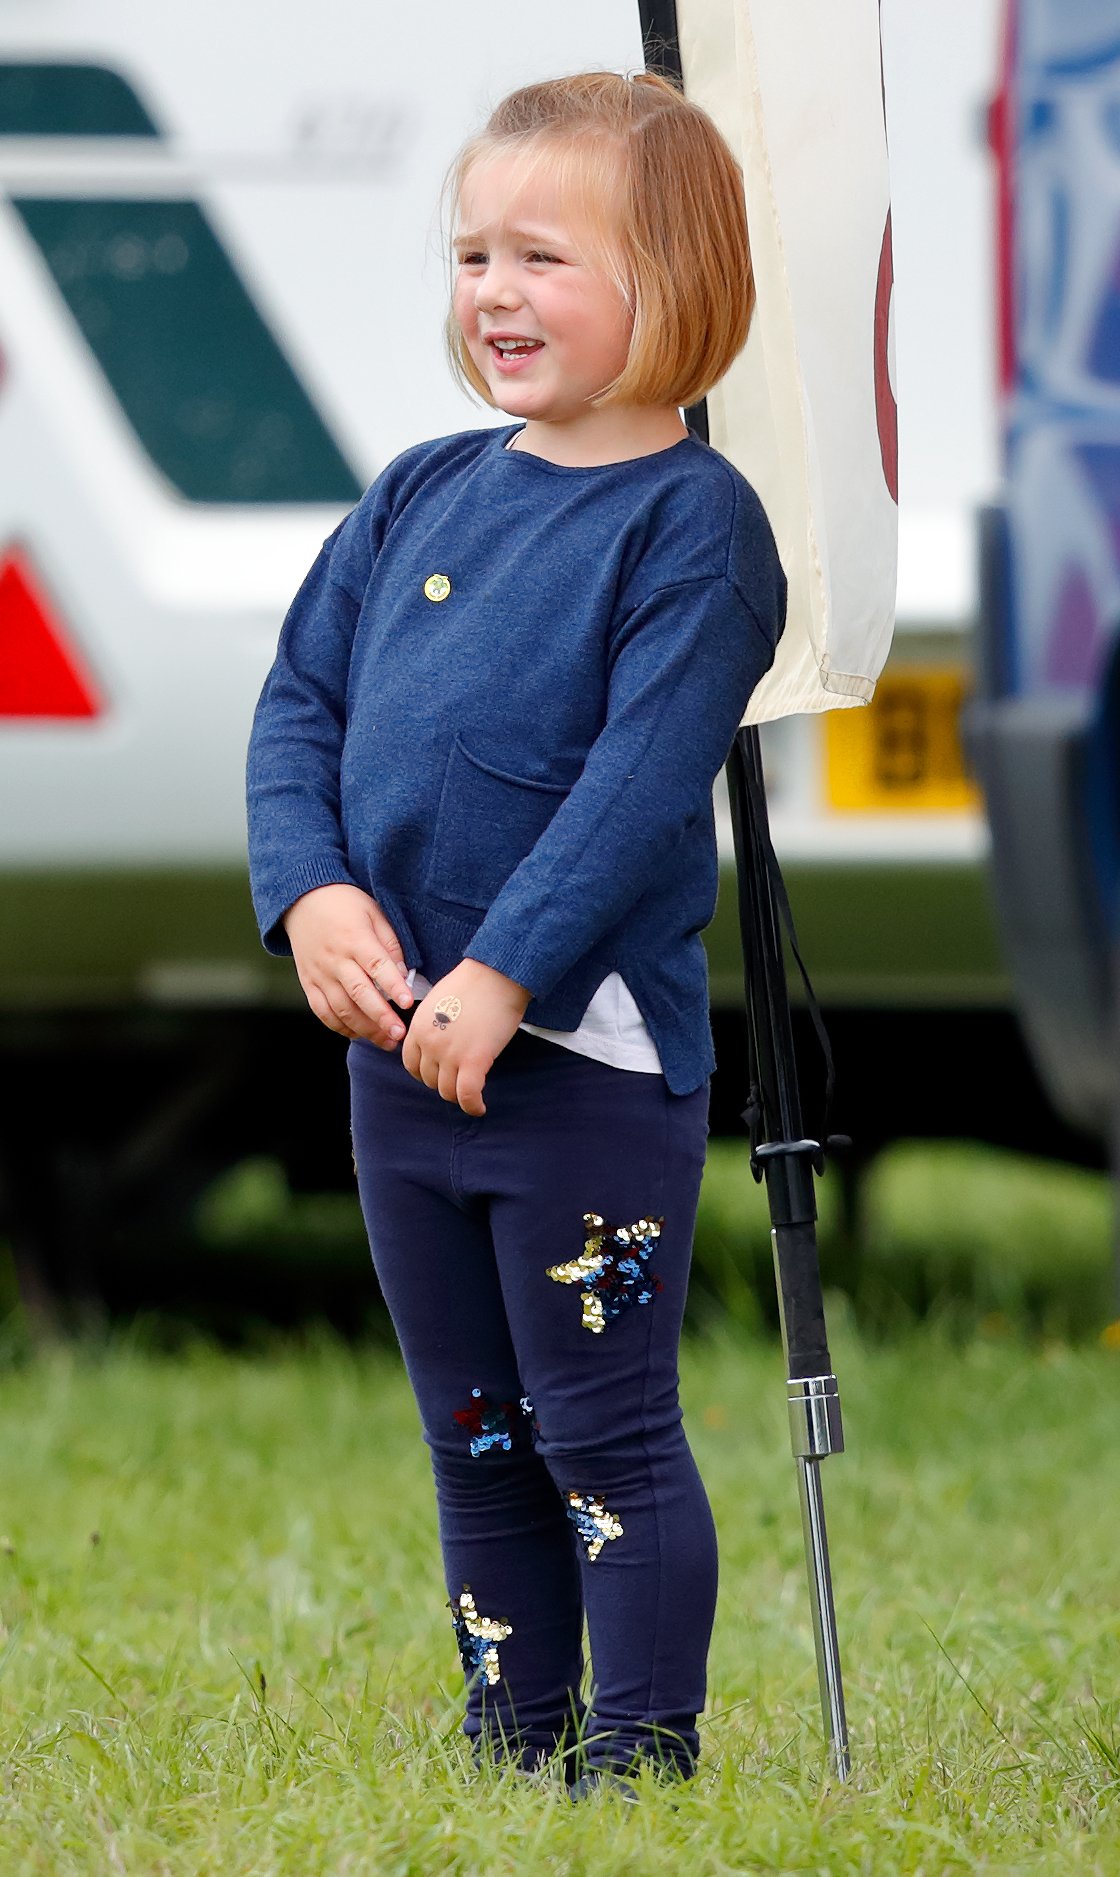 Mia Tindall | Quelle: Getty Images